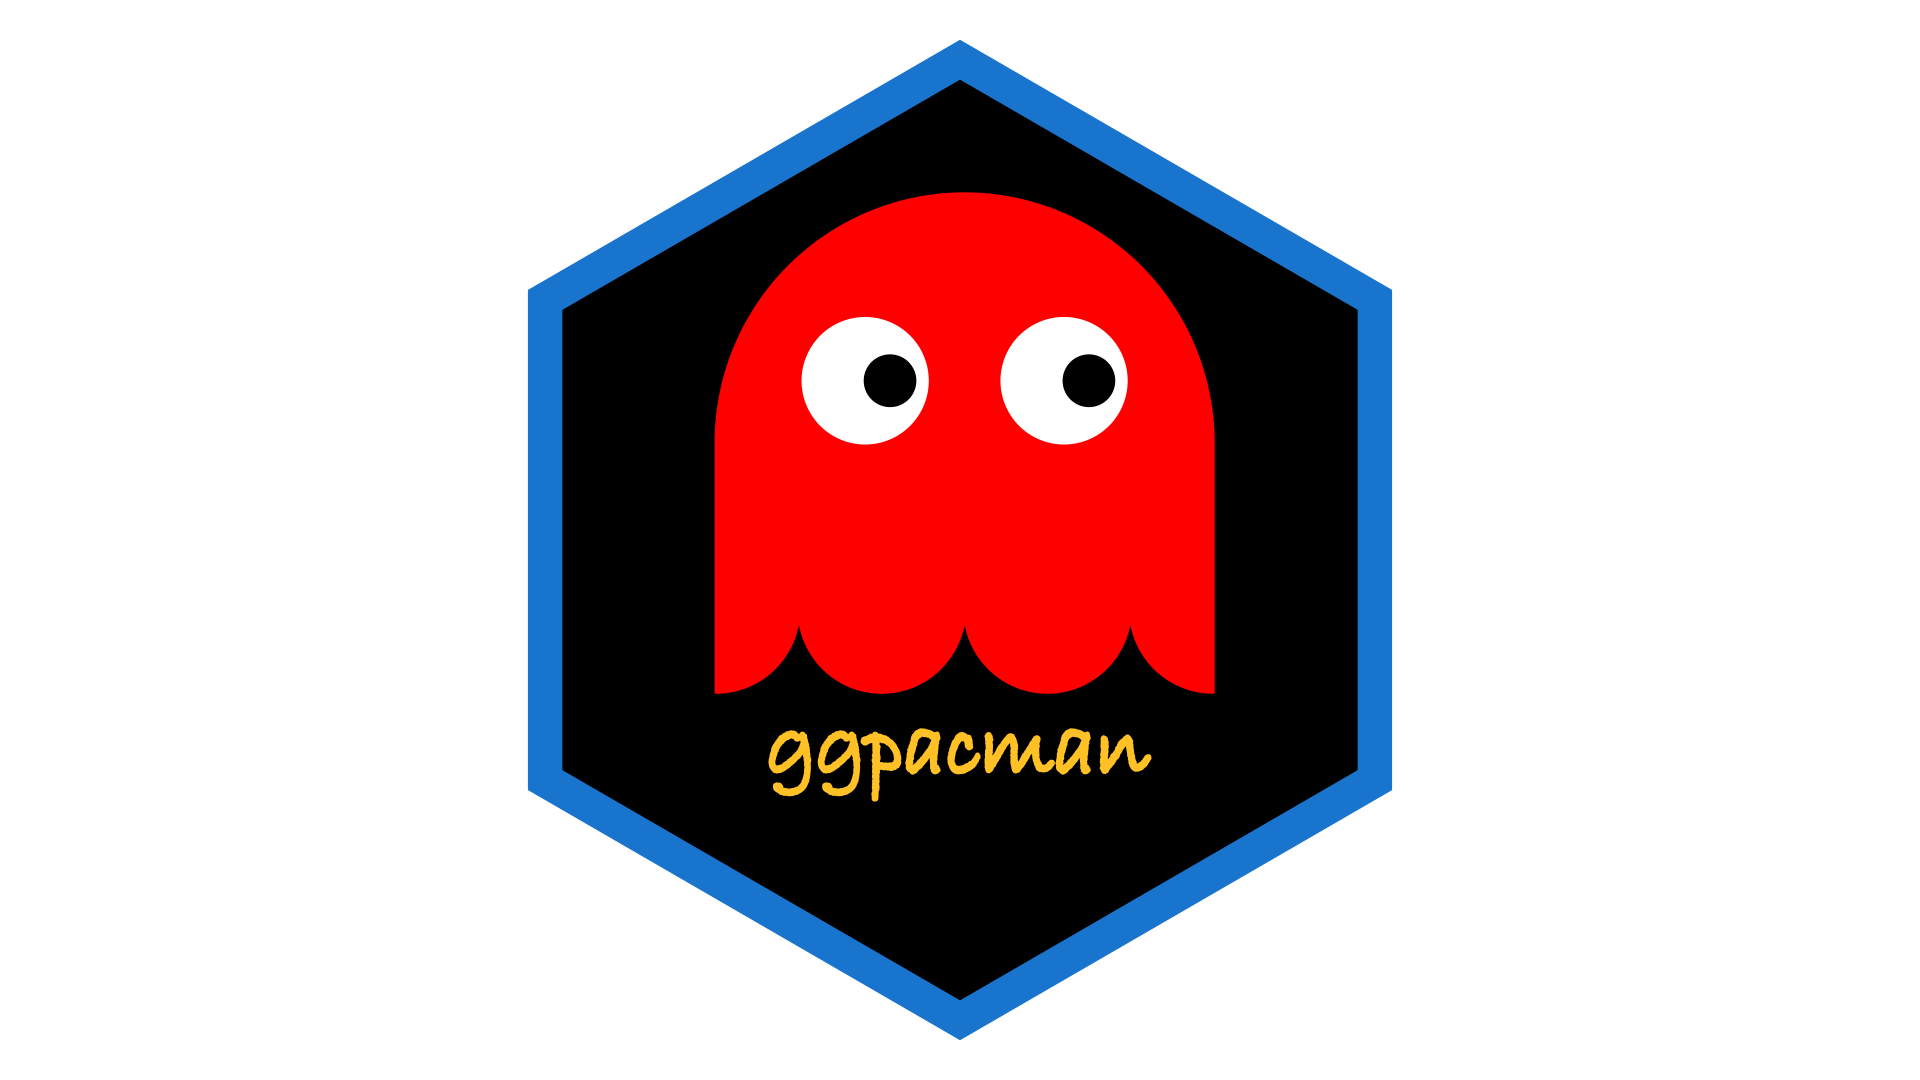 `ggpacman` hexagonal logo representing a red ghost from the game Pac-Man on a black background with a blue border and `ggpacman` written in yellow below the ghost.
